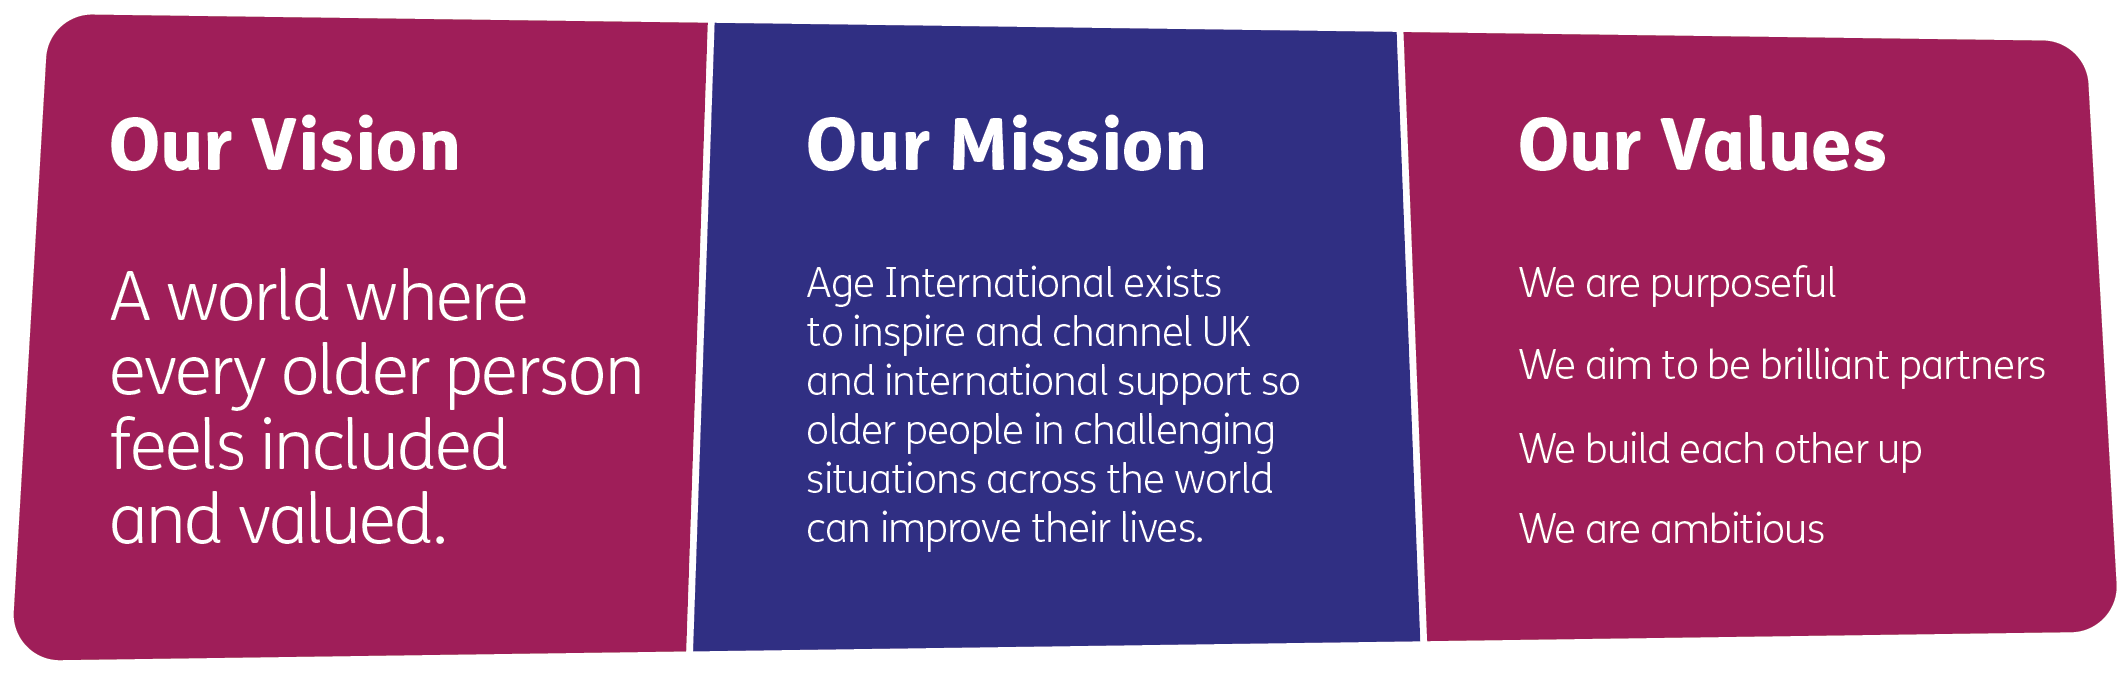 Our vision - a world where every older person feels included and valued. Our mission - Age International exists to inspire and channel UK and international support so older people in challenging situations across the world can improve their lives. Our values - we are purposeful, we aim to be brilliant partners, we build each other up, we are ambitious. 